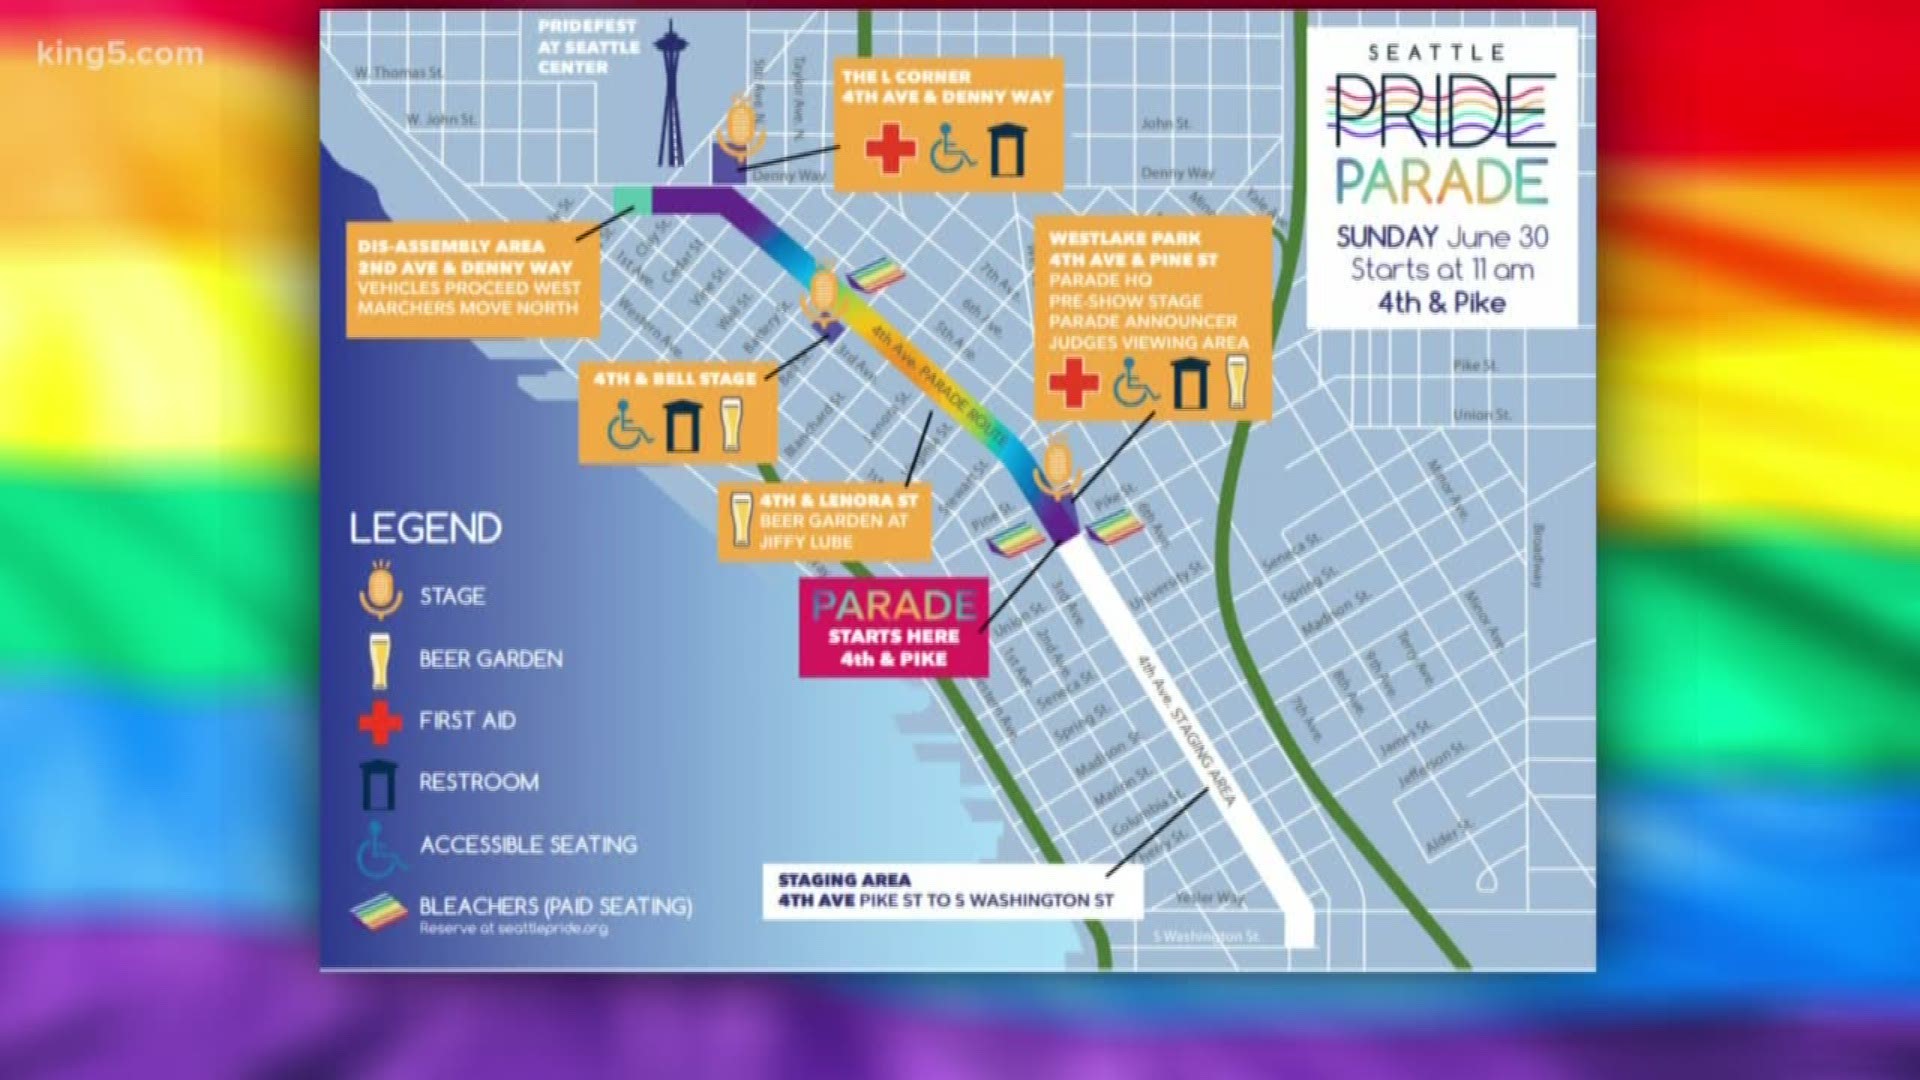 Pridefests and parades will celebrate Seattle's LGBTQ community.